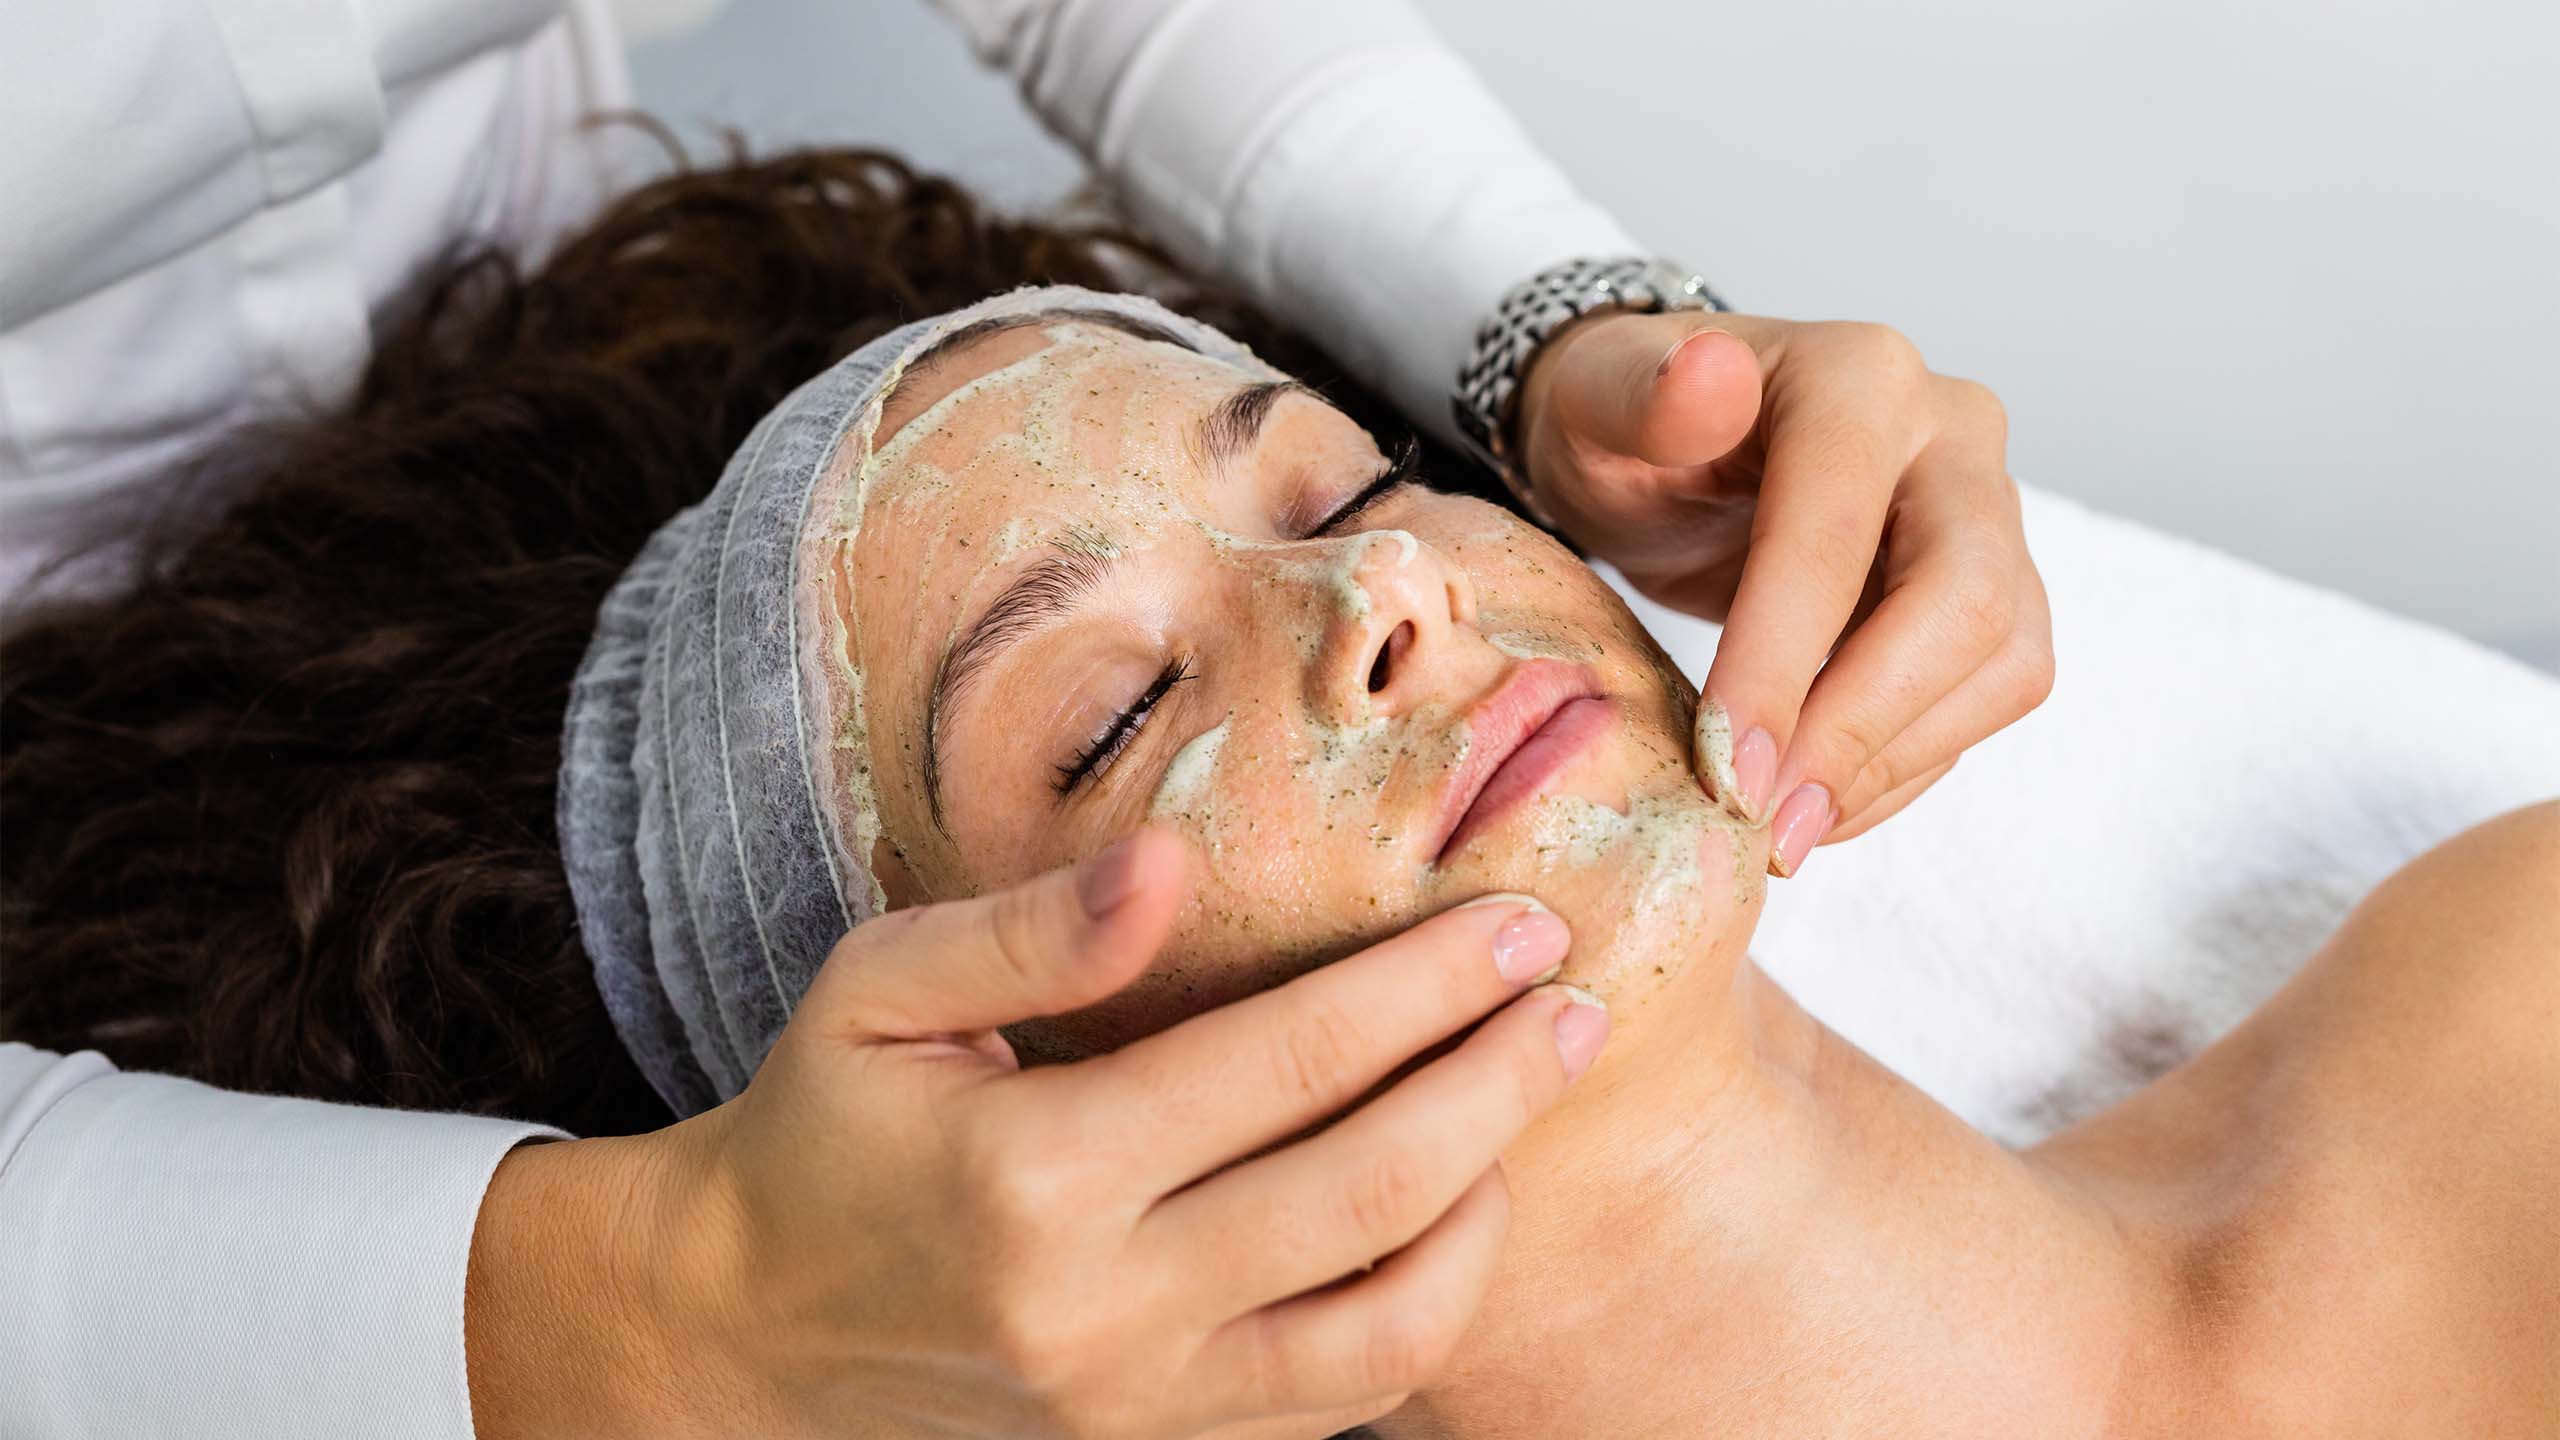 Rosacea Facial Treatments: Are They Worth It? - Gladskin